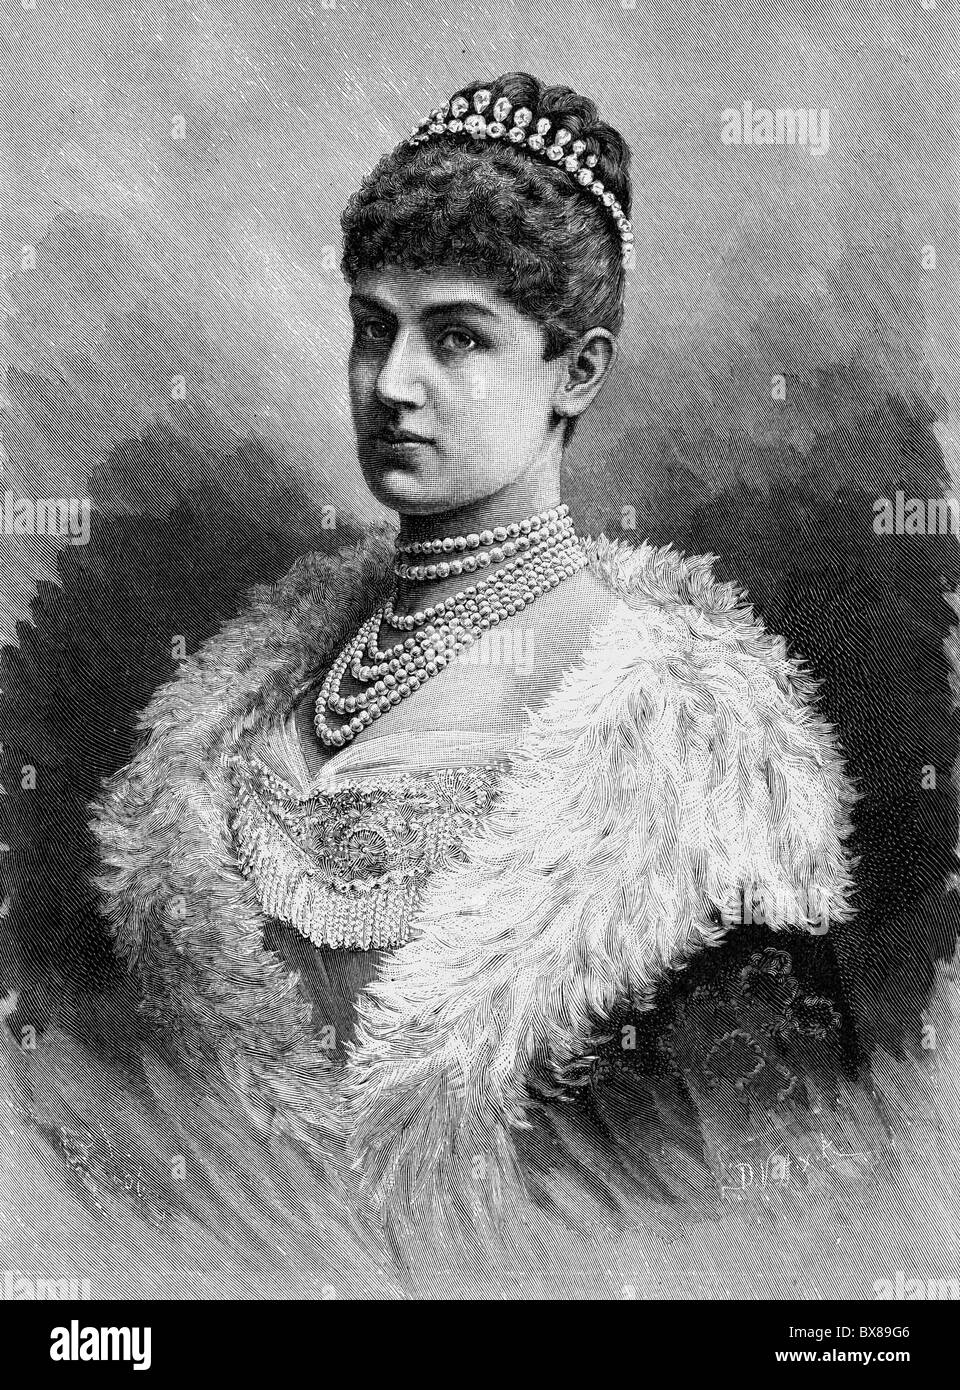 Charlotte, 10.10.1864 - 16.7.1946, Queen consort of Wuerttemberg 1891 - 1918, half length, wood engraving after a photography, late 19th century, Stock Photo